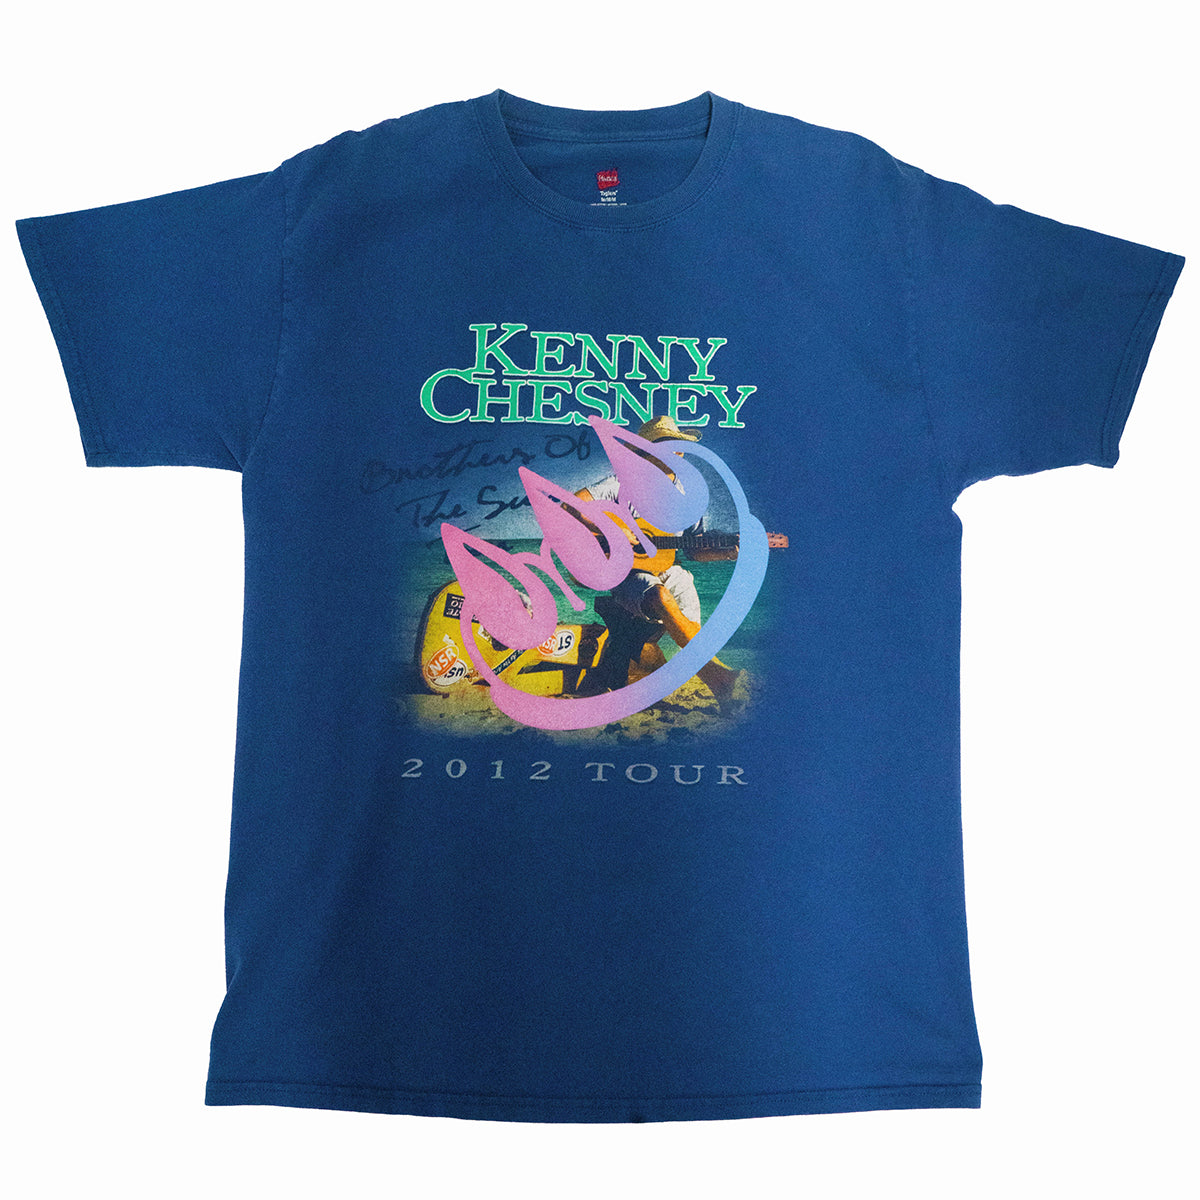 GRADIENT CLAW KENNY CHESNEY TEE